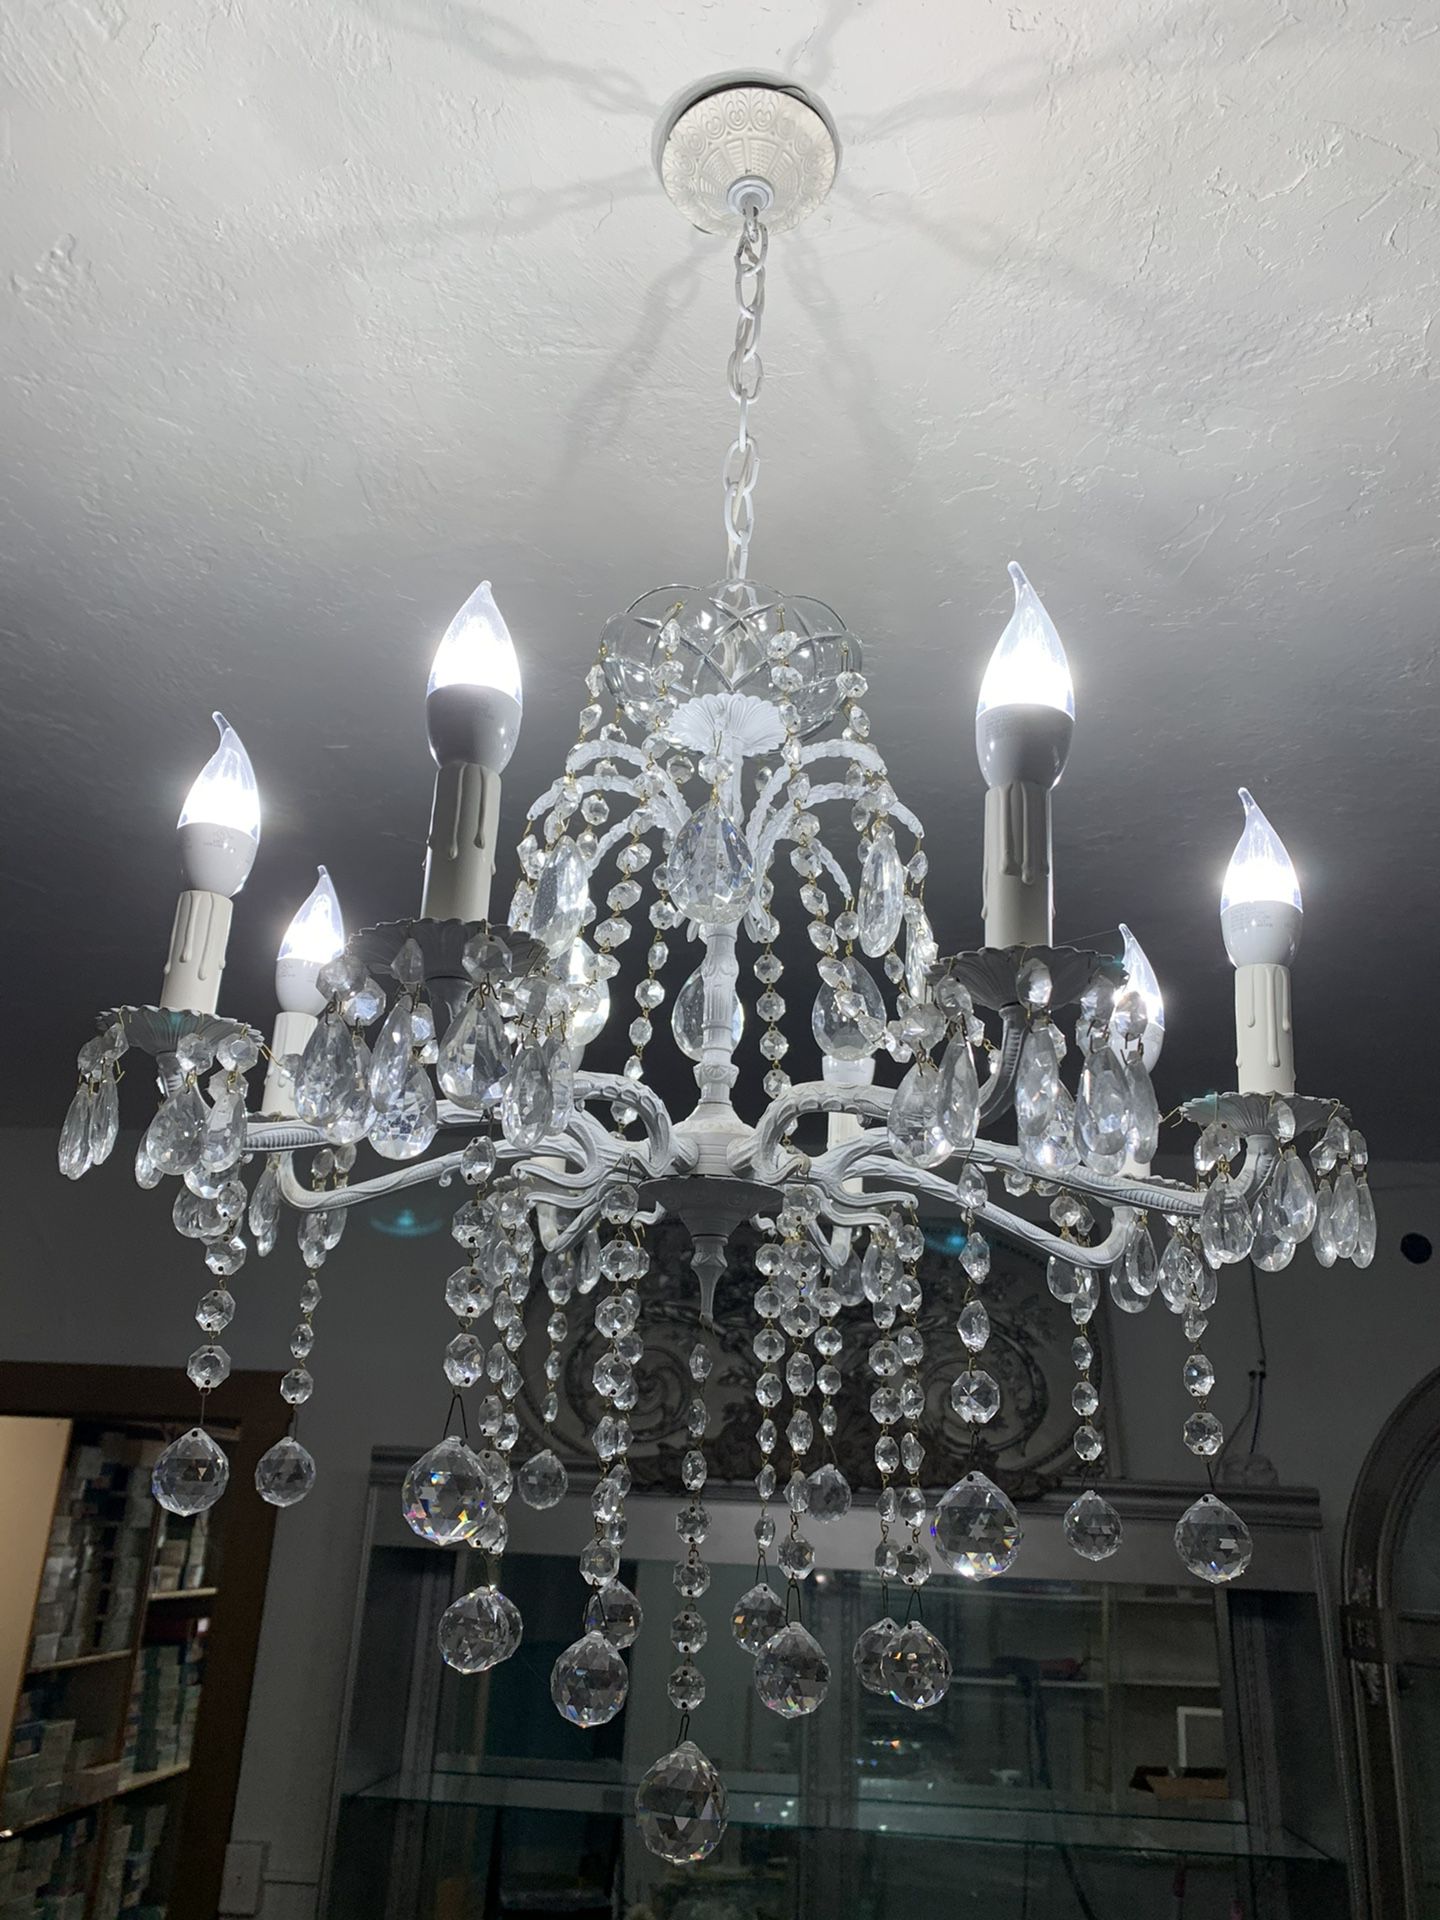 Vintage White Wrought Iron Australian Crystal Chandelier Hanging Ceiling Light Fixture 